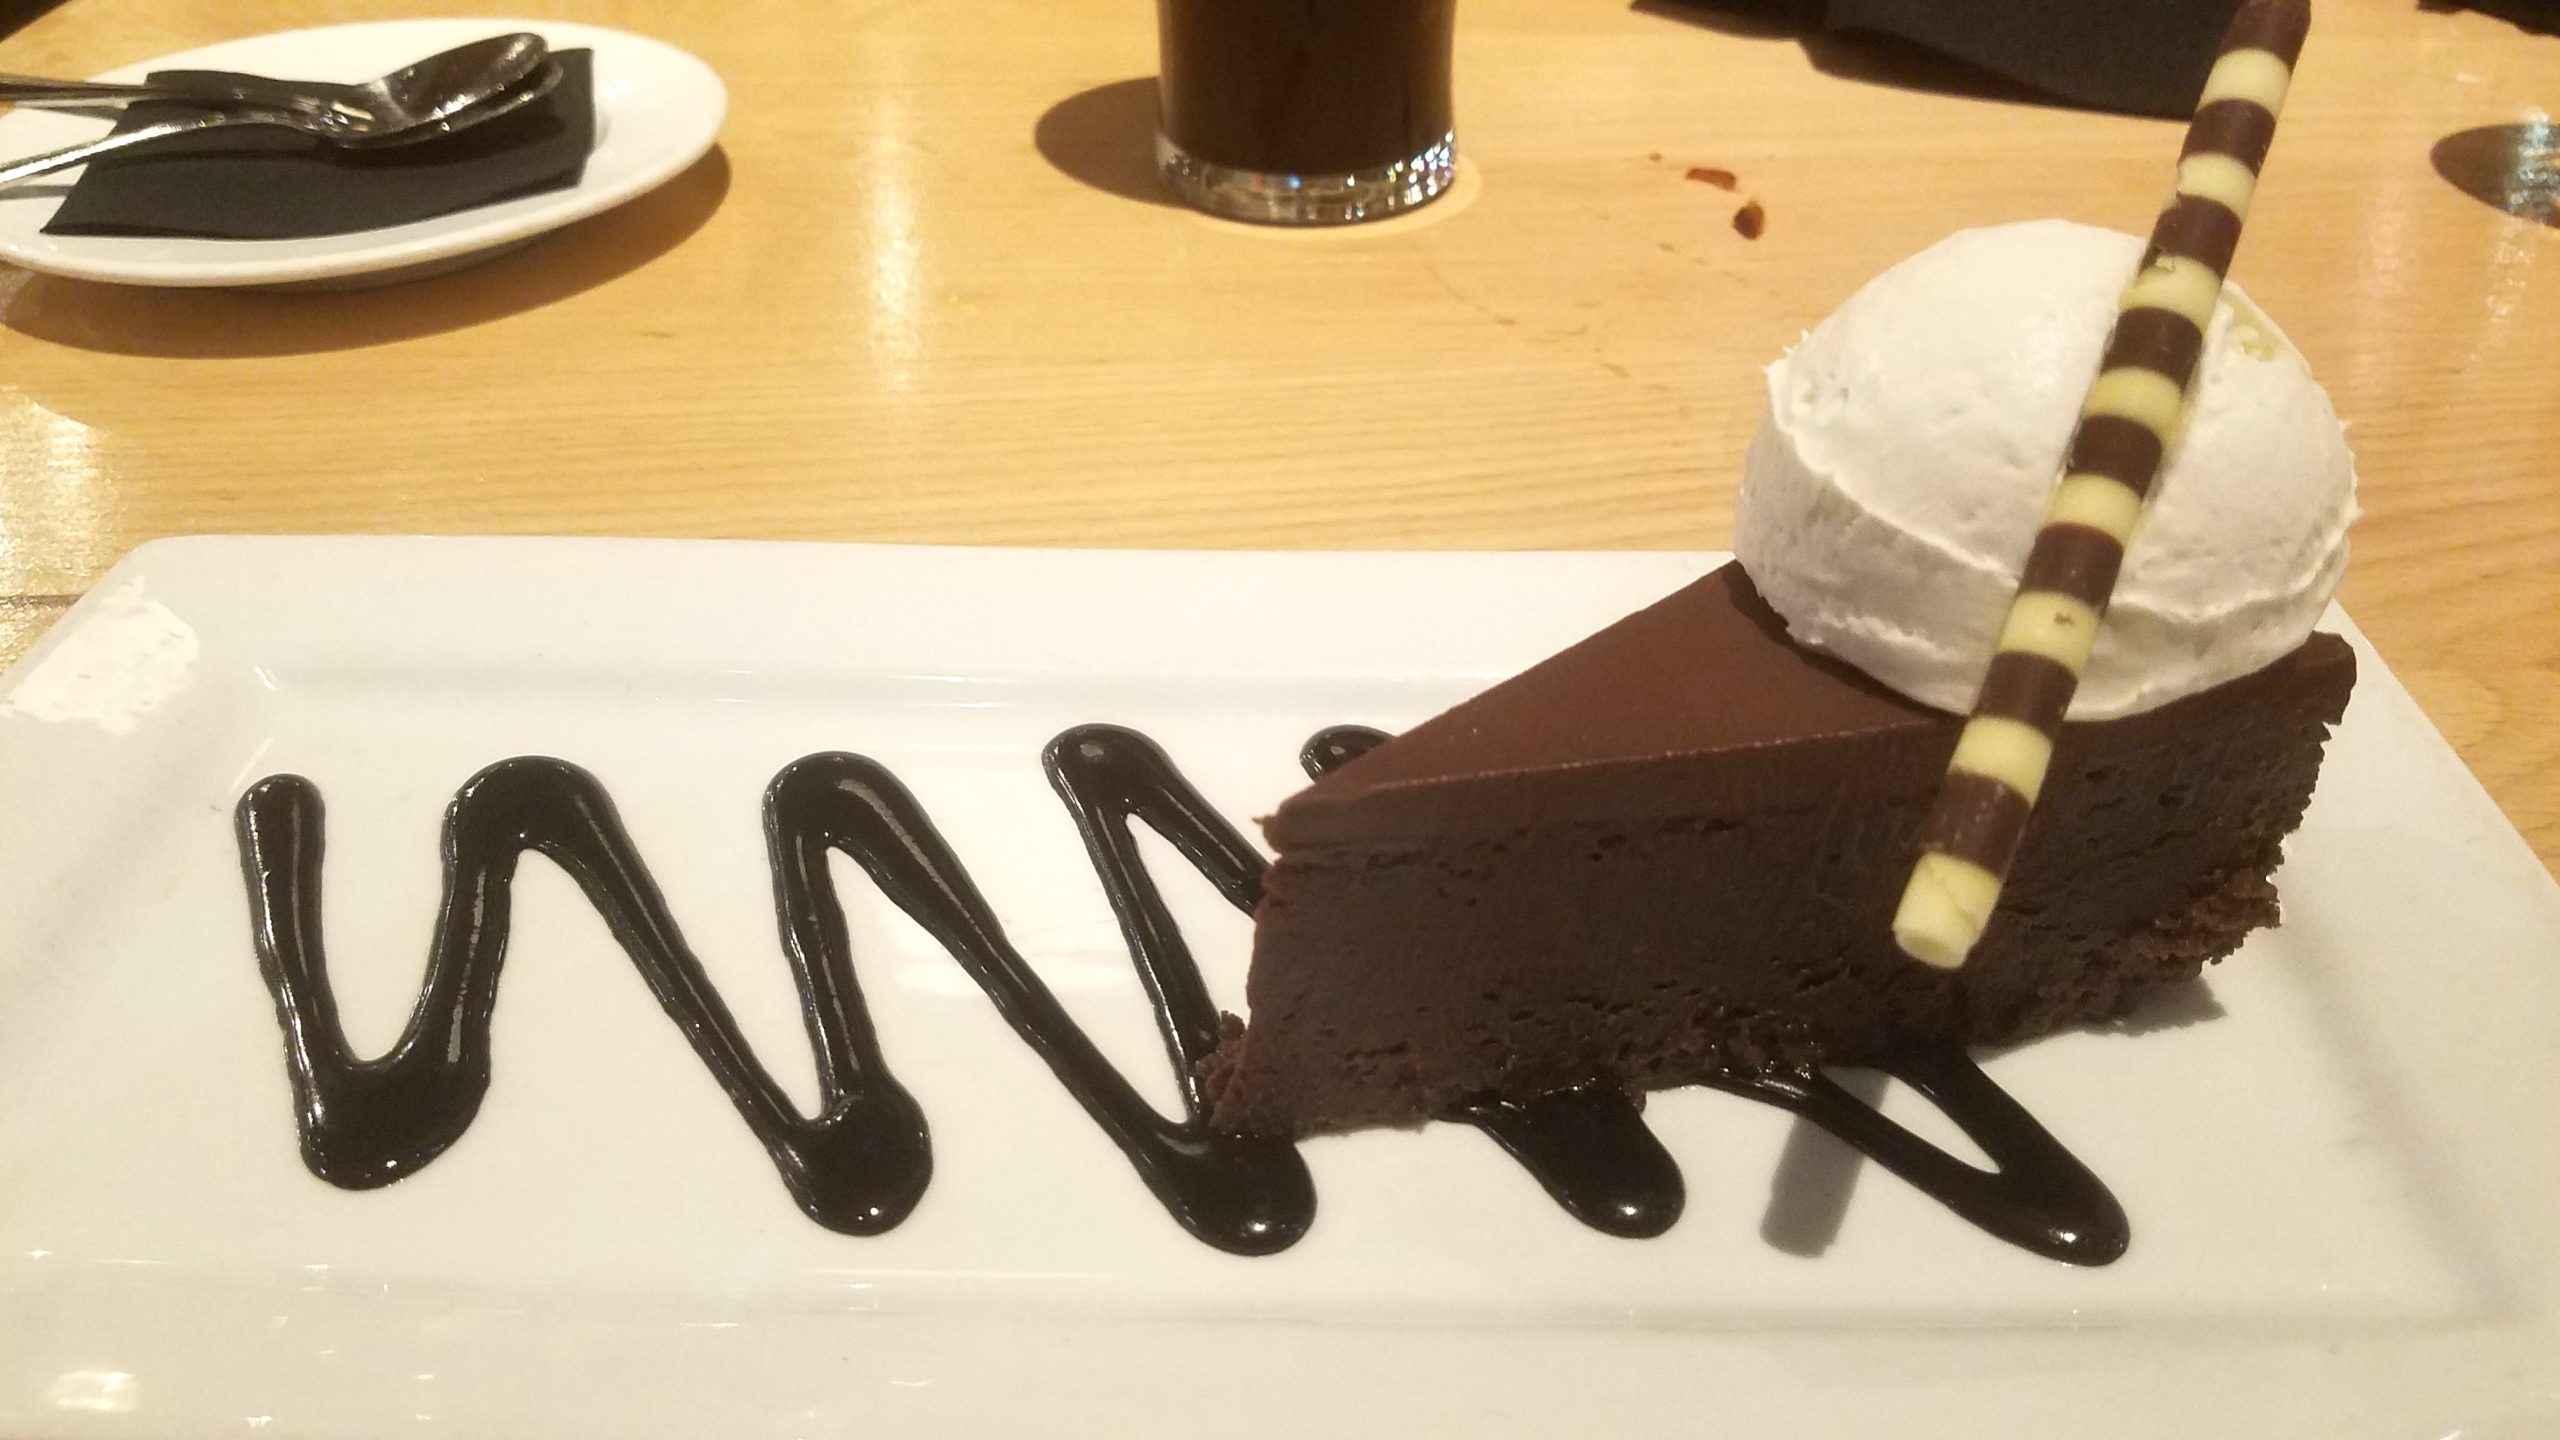 Steven had chocolate cake and vanilla ice cream for dessert at Deschutes and it sure looks scrumptious!